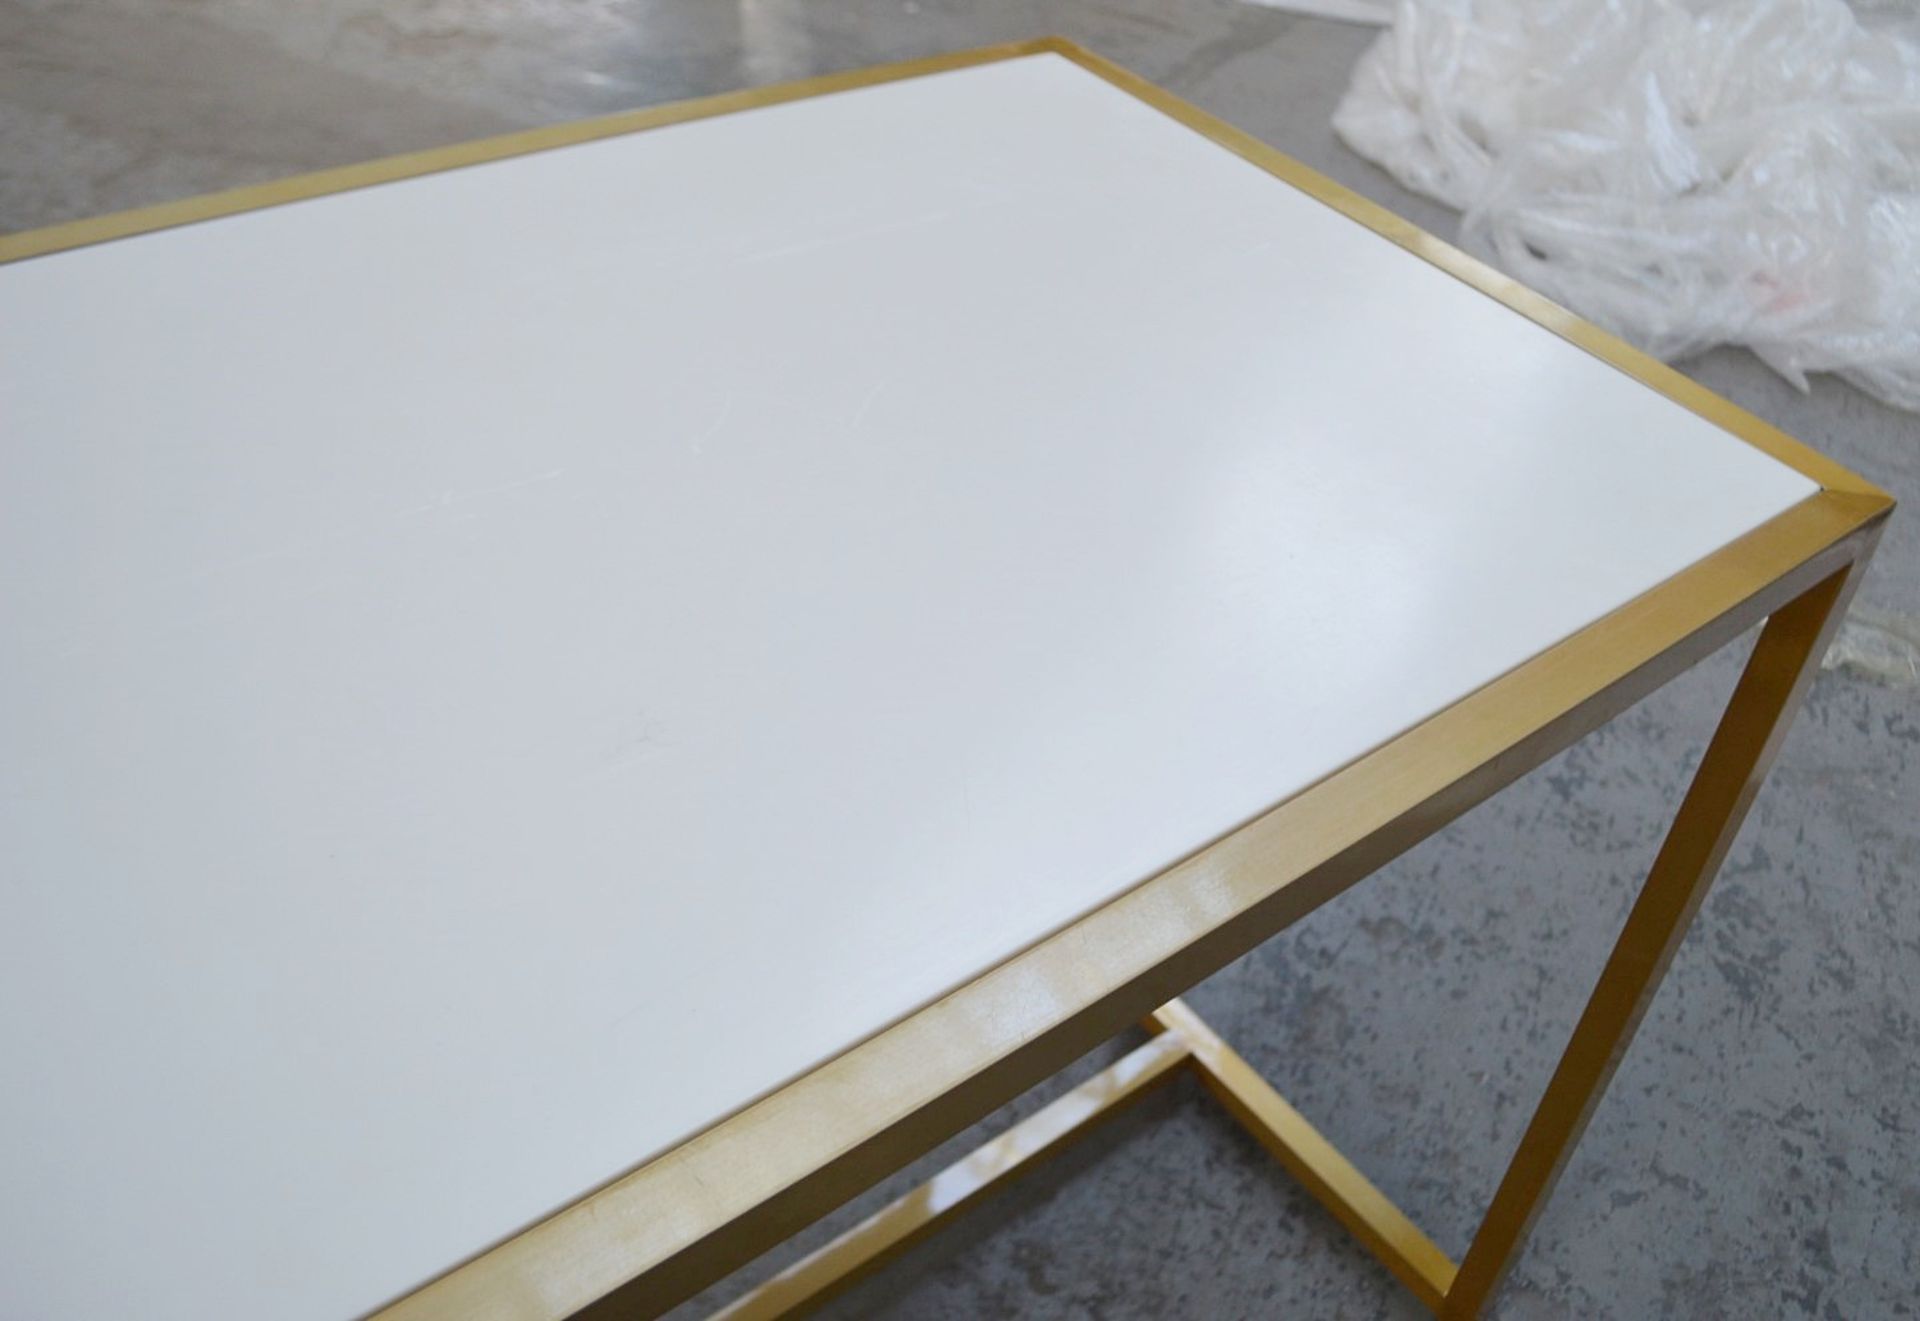 1 x High Display Table With A Sturdy Metal Base In Gold - Dimensions: H92 x W130 x D75cm - Image 4 of 4